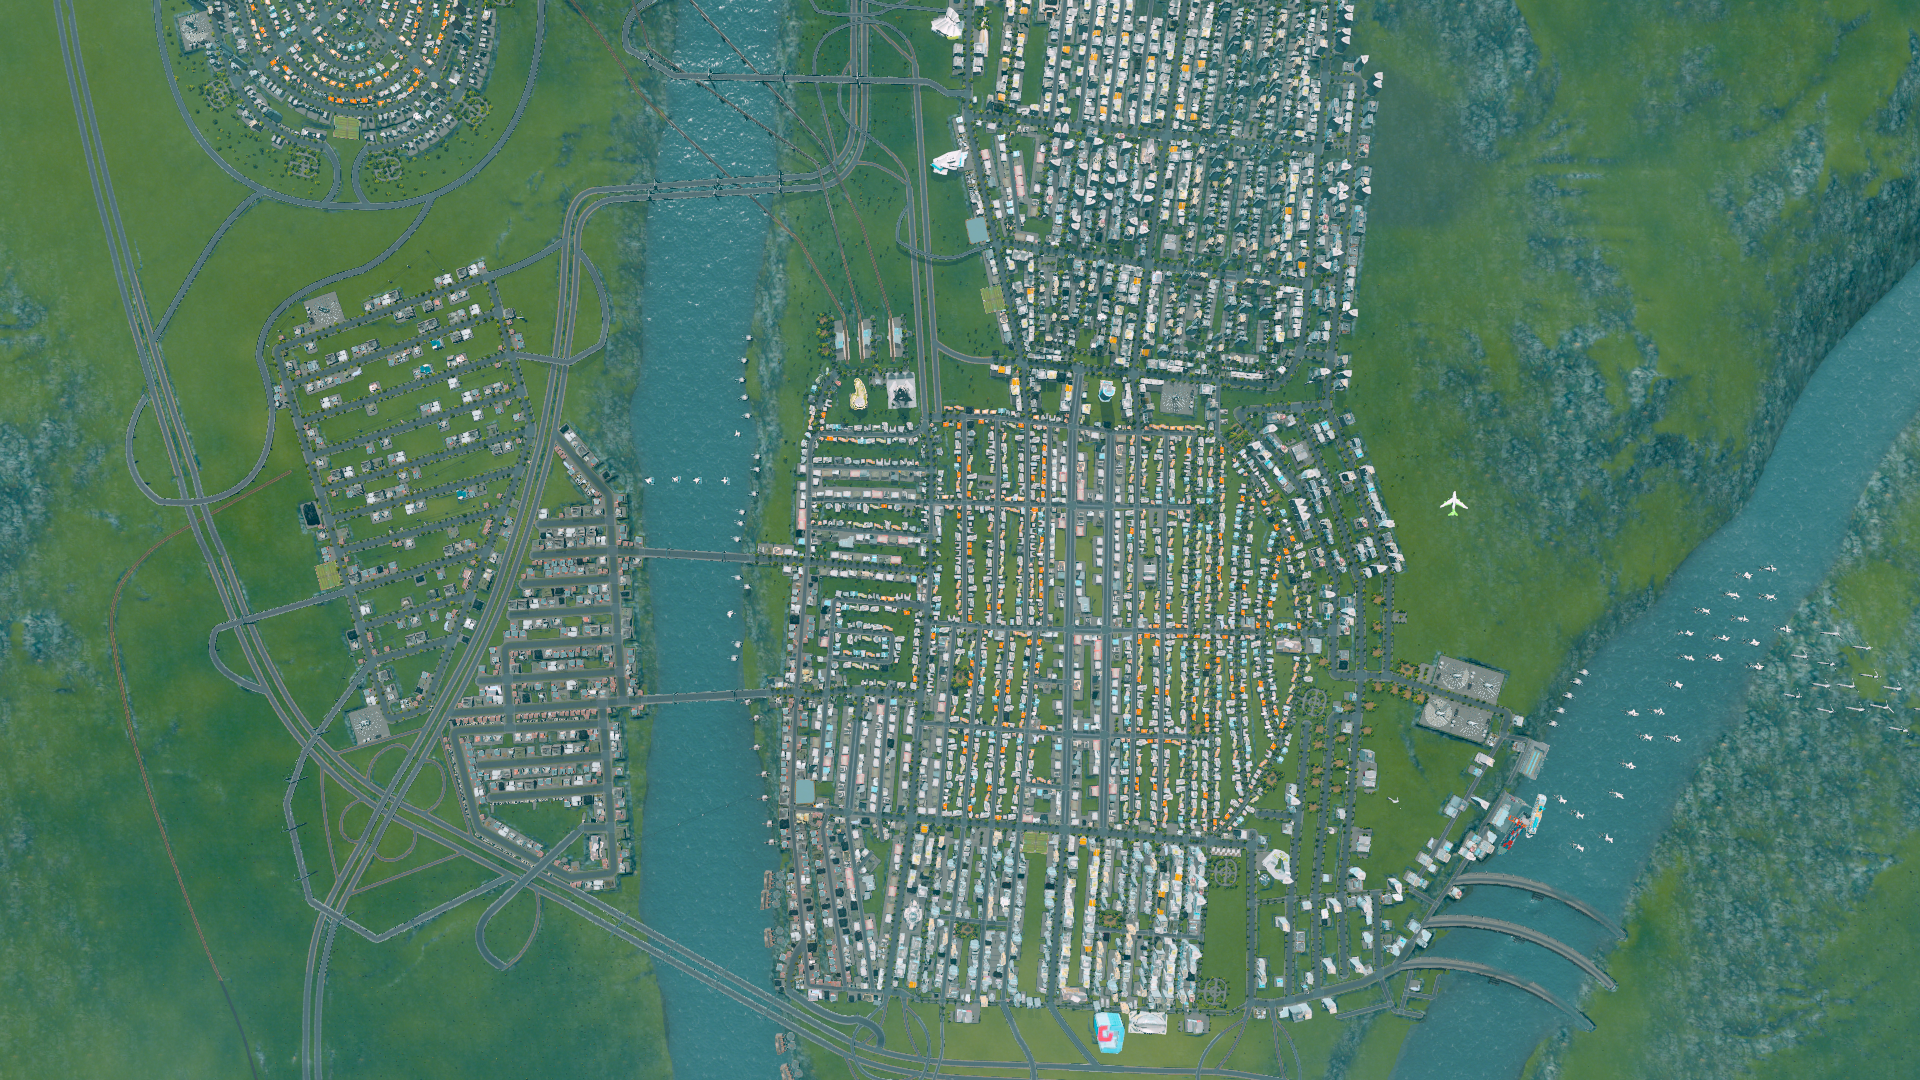 cities skylines all maps